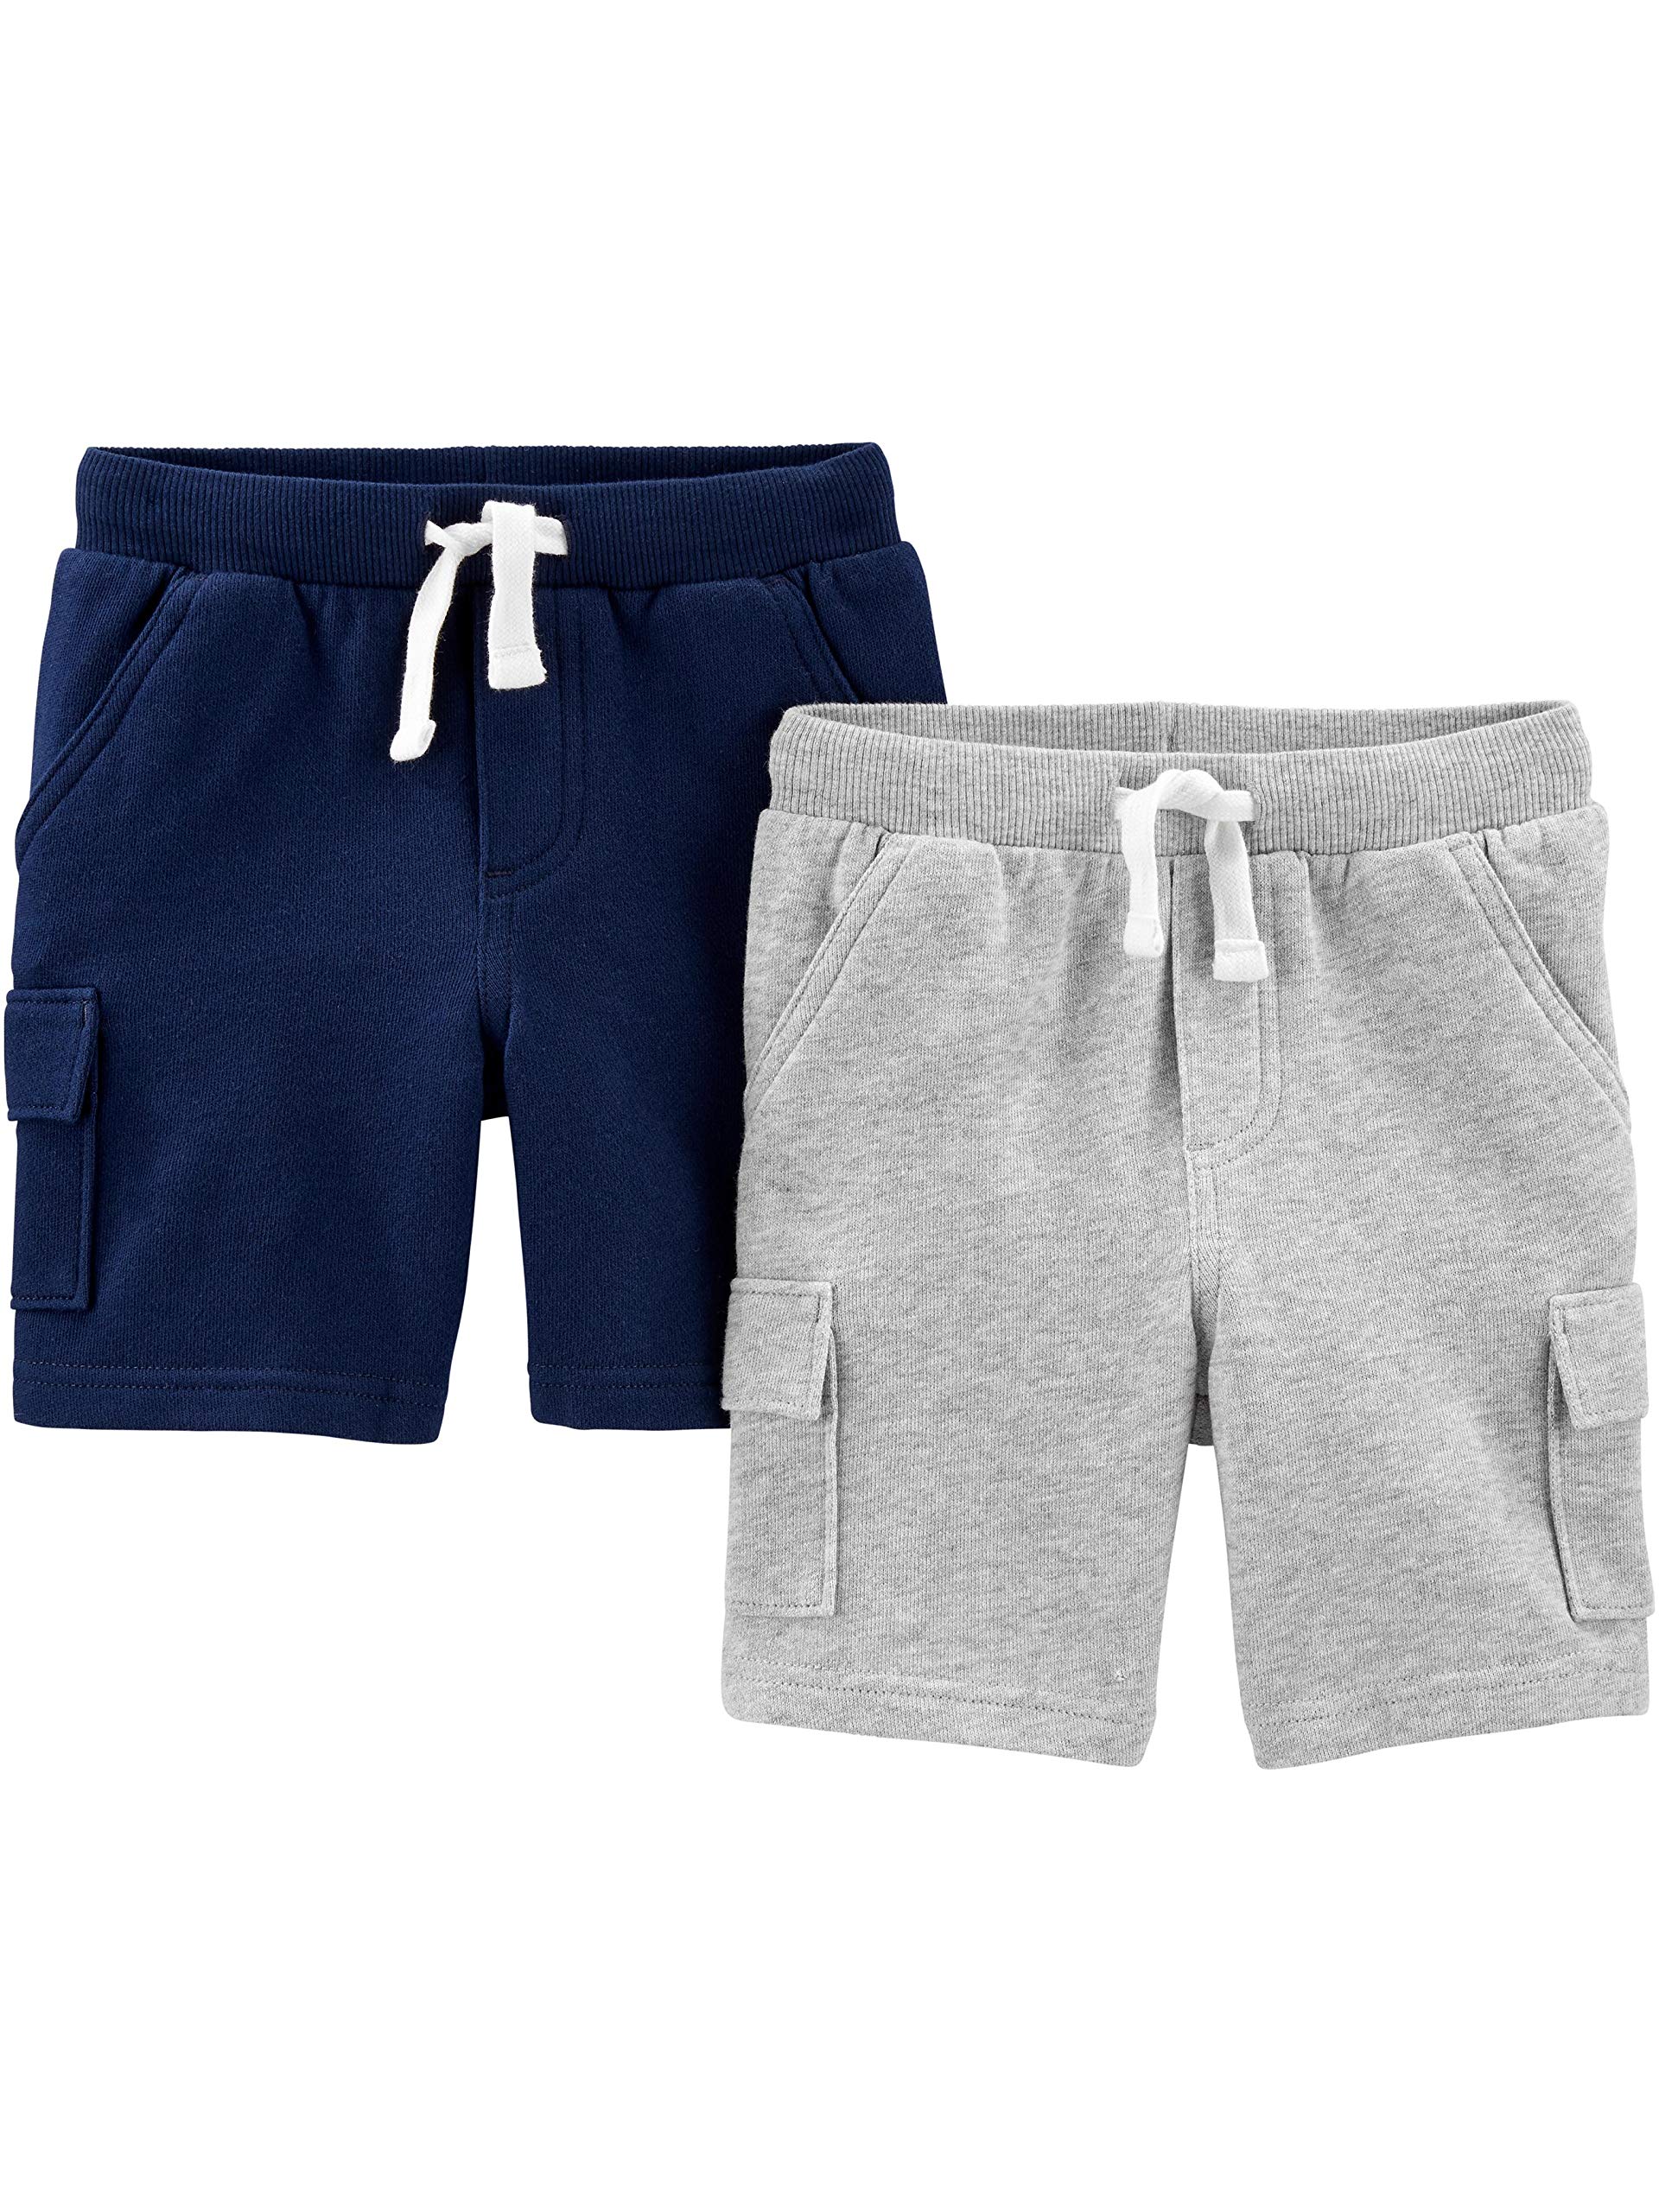 Simple Joys by Carter's Boys' Knit Cargo Shorts, Pack of 2, Navy/Grey, 4T